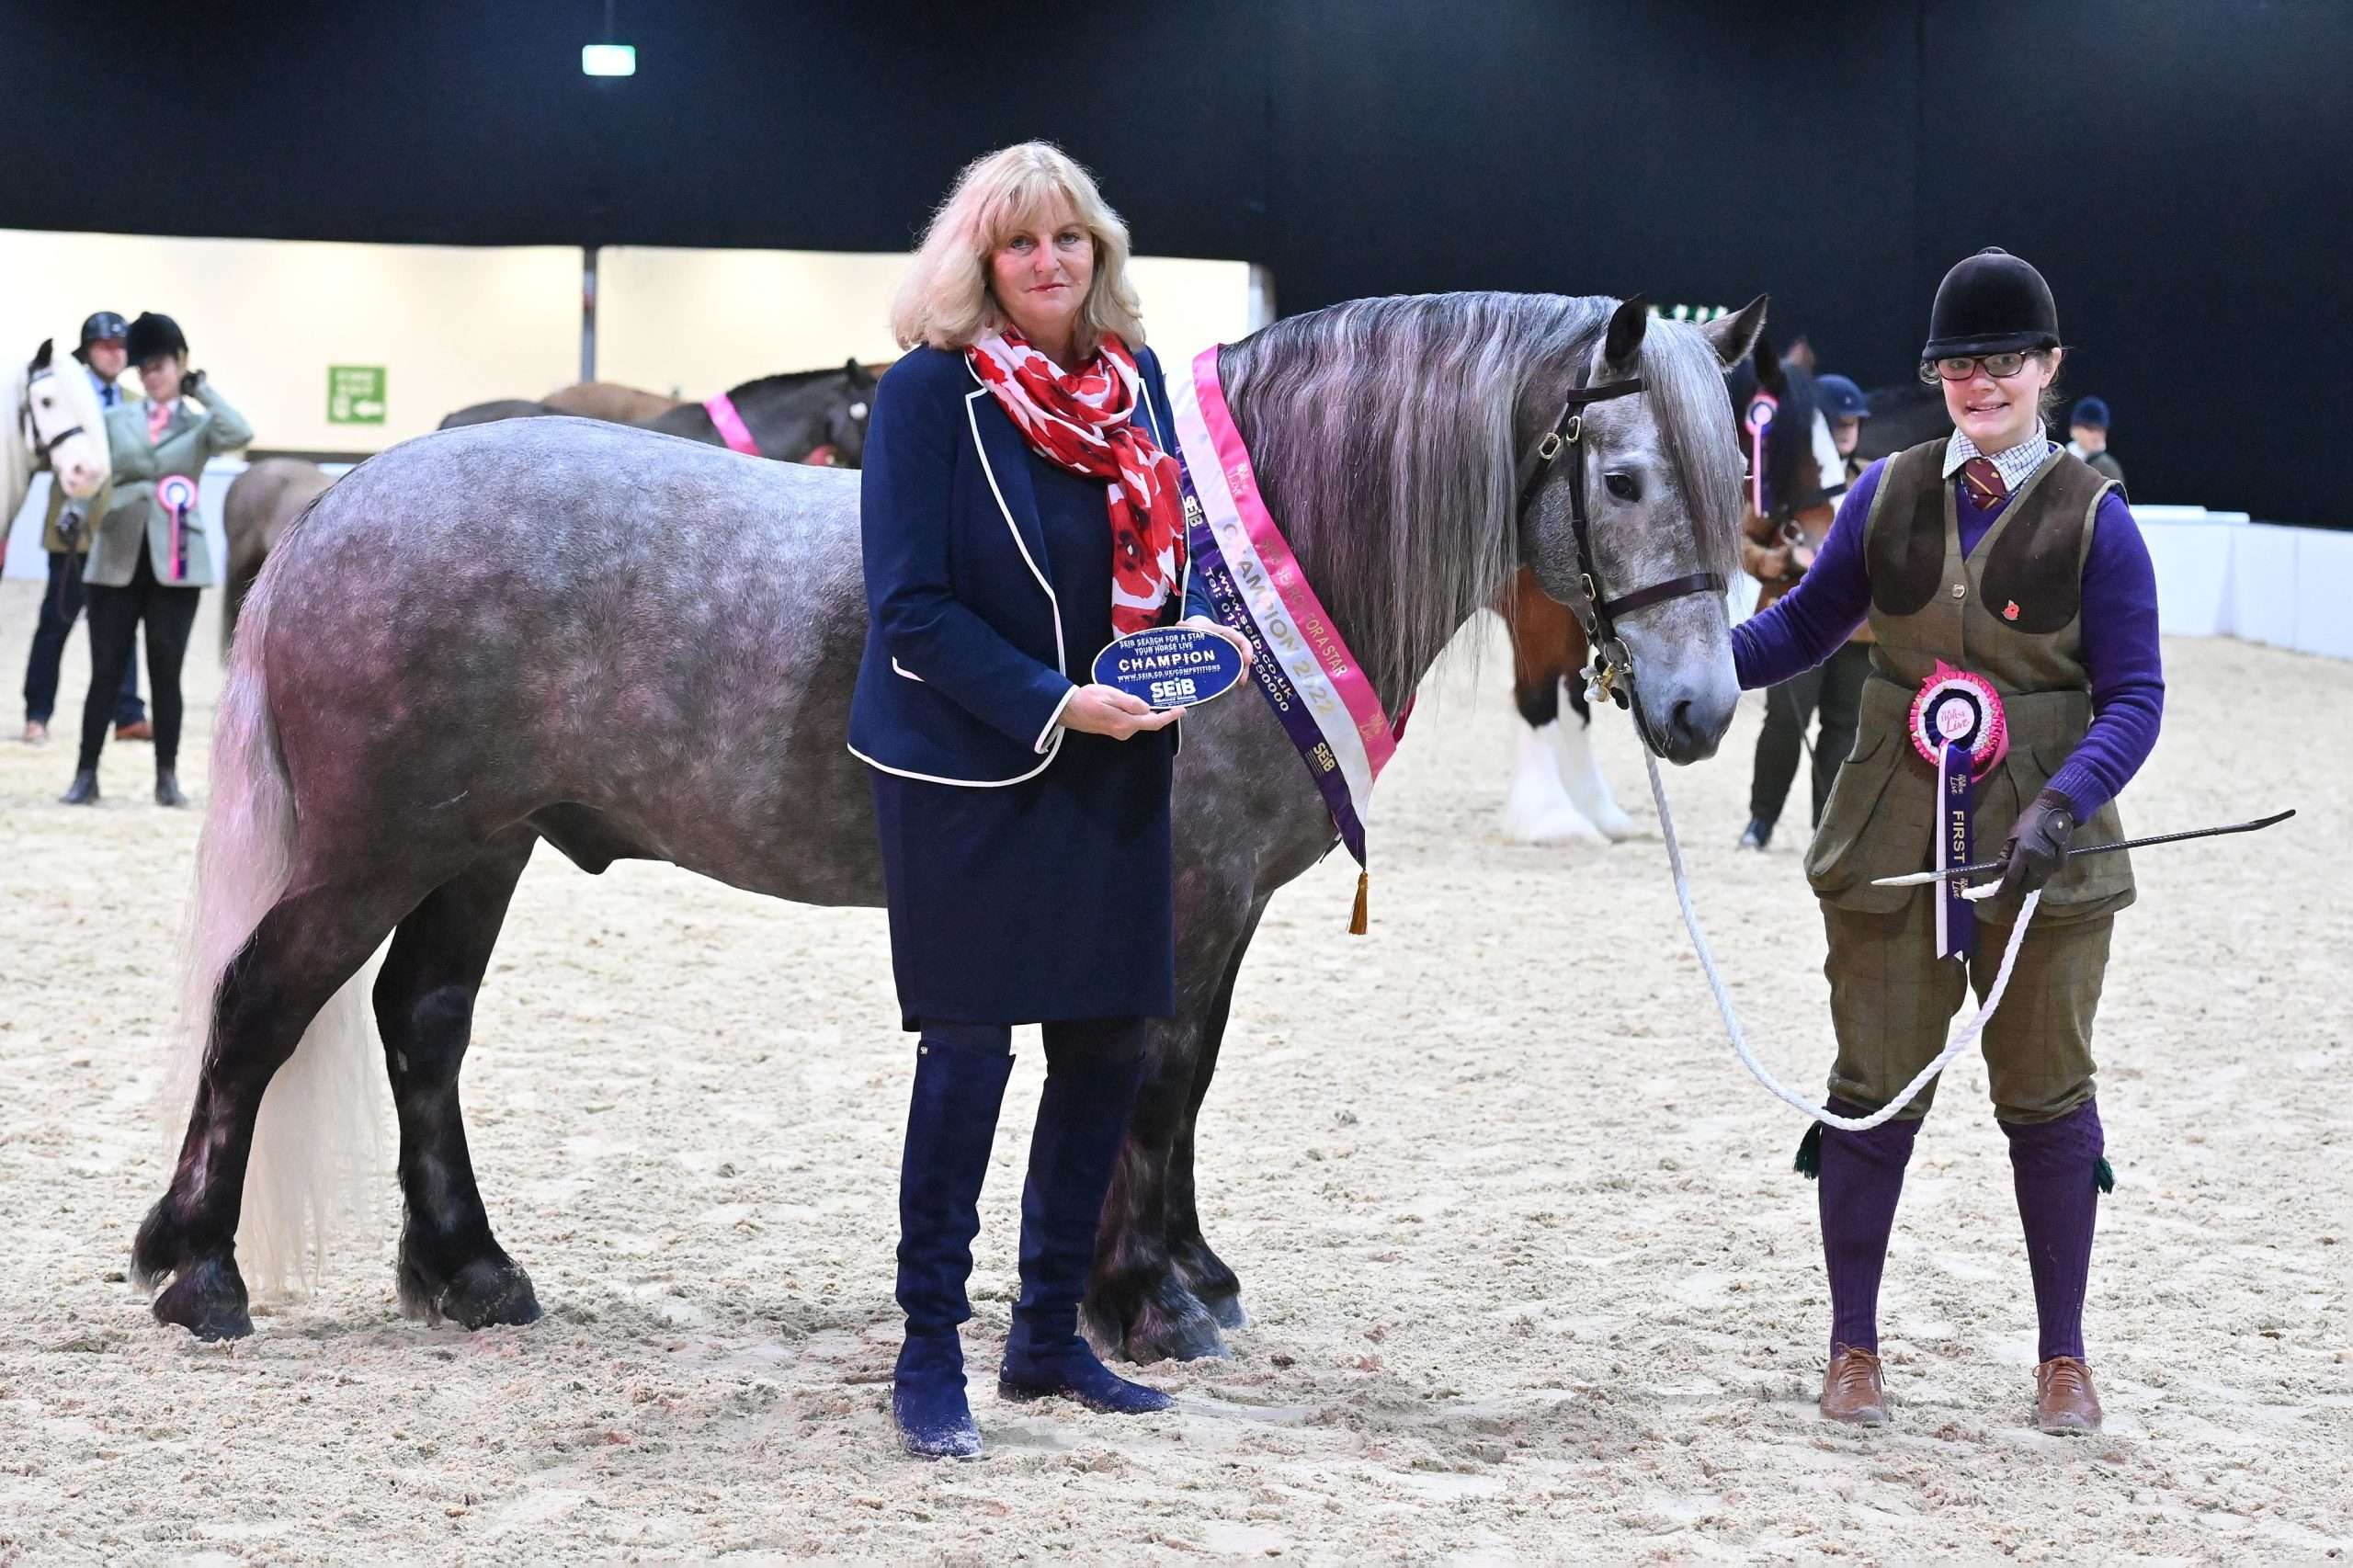 In-hand mountain and moorland winner, Lachlann of Croila Croft, had travelled all the way down from the Scottish Highlands with his owner and handler, Judith Hogg.